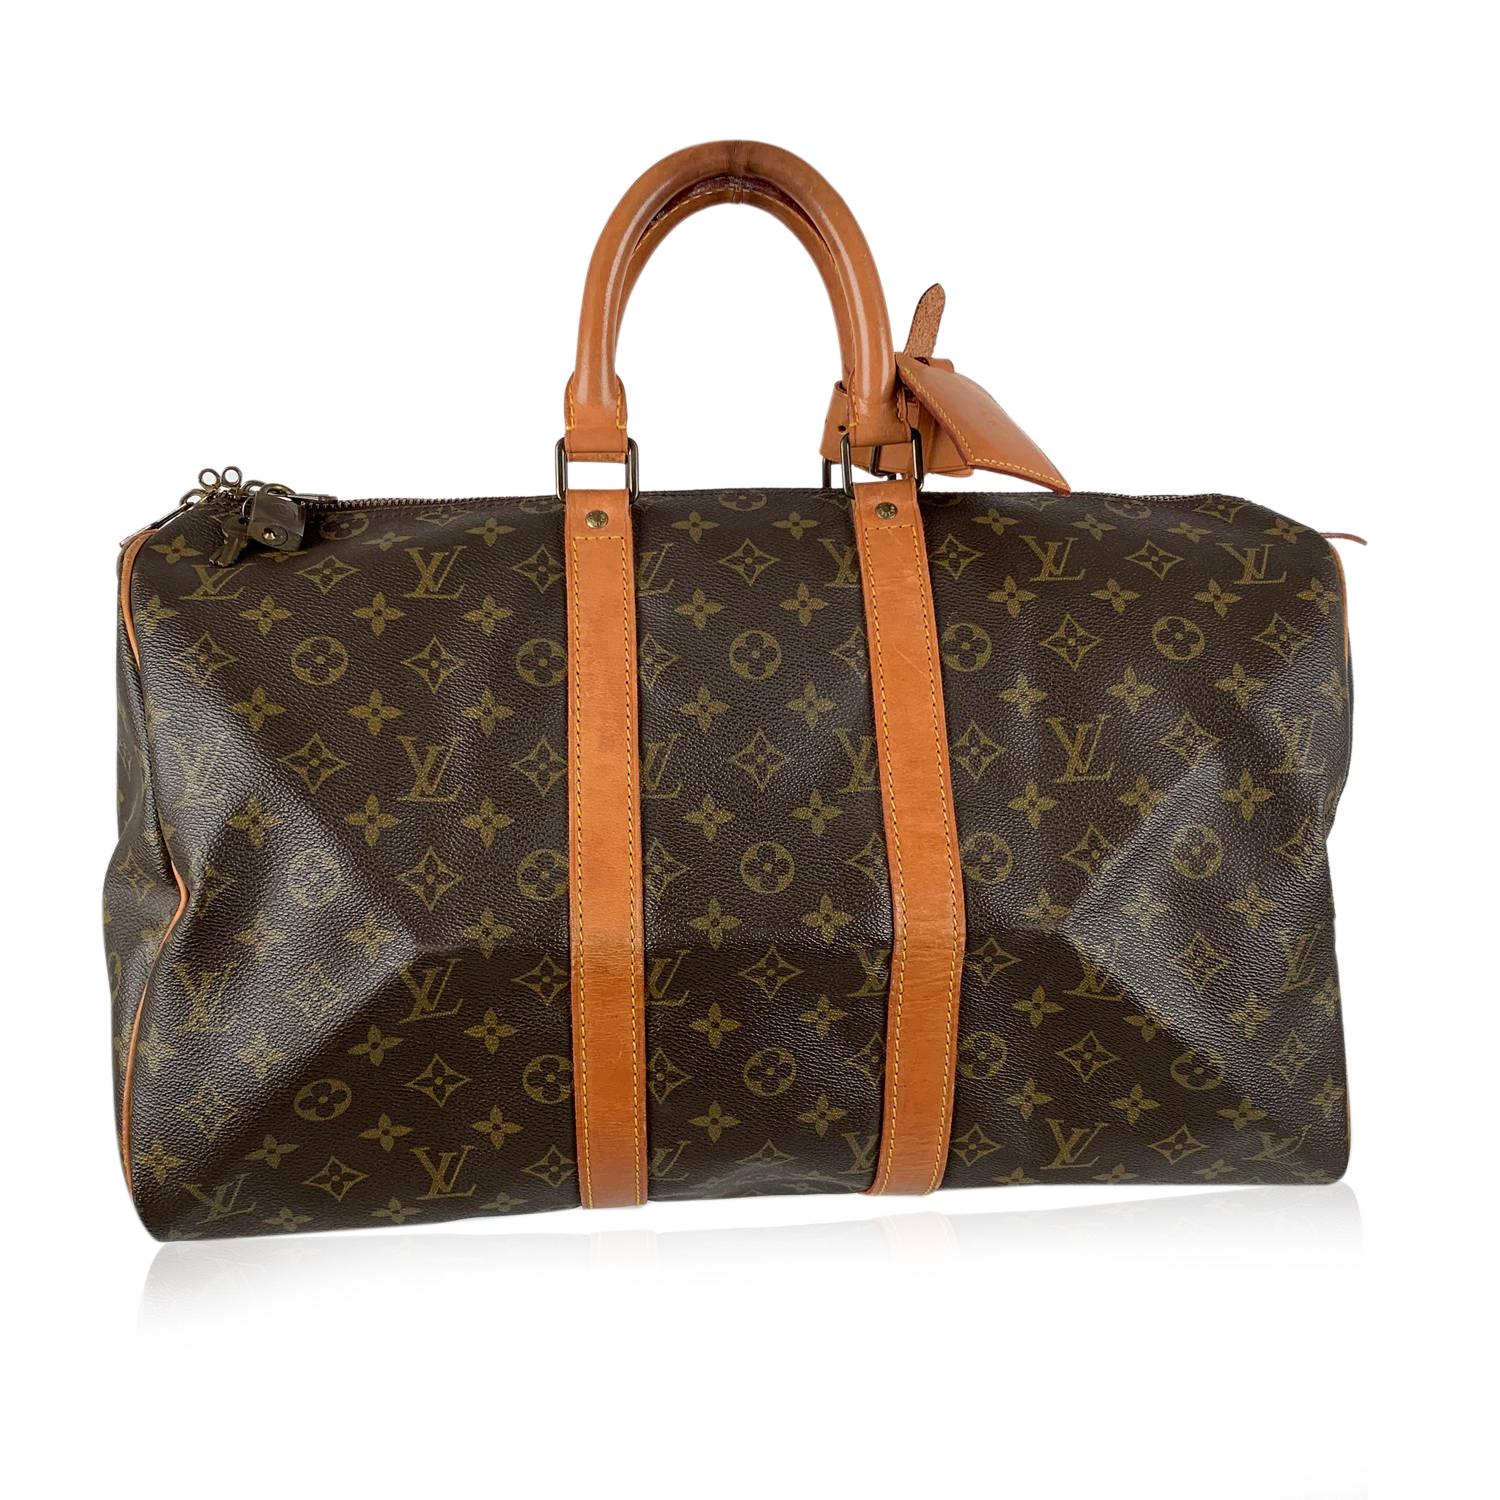 Louis Vuitton Vintage Monogram Canvas Keepall 45 Travel Bag

Material : Canvas
Color : Brown
Model : Keepall 45
Gender : Women, Men
Country of Manufacture : France
Size : Large
Bag Depth : 8 inches - 20 cm 
Bag Height : 11 inches - 29 cm
Bag Length